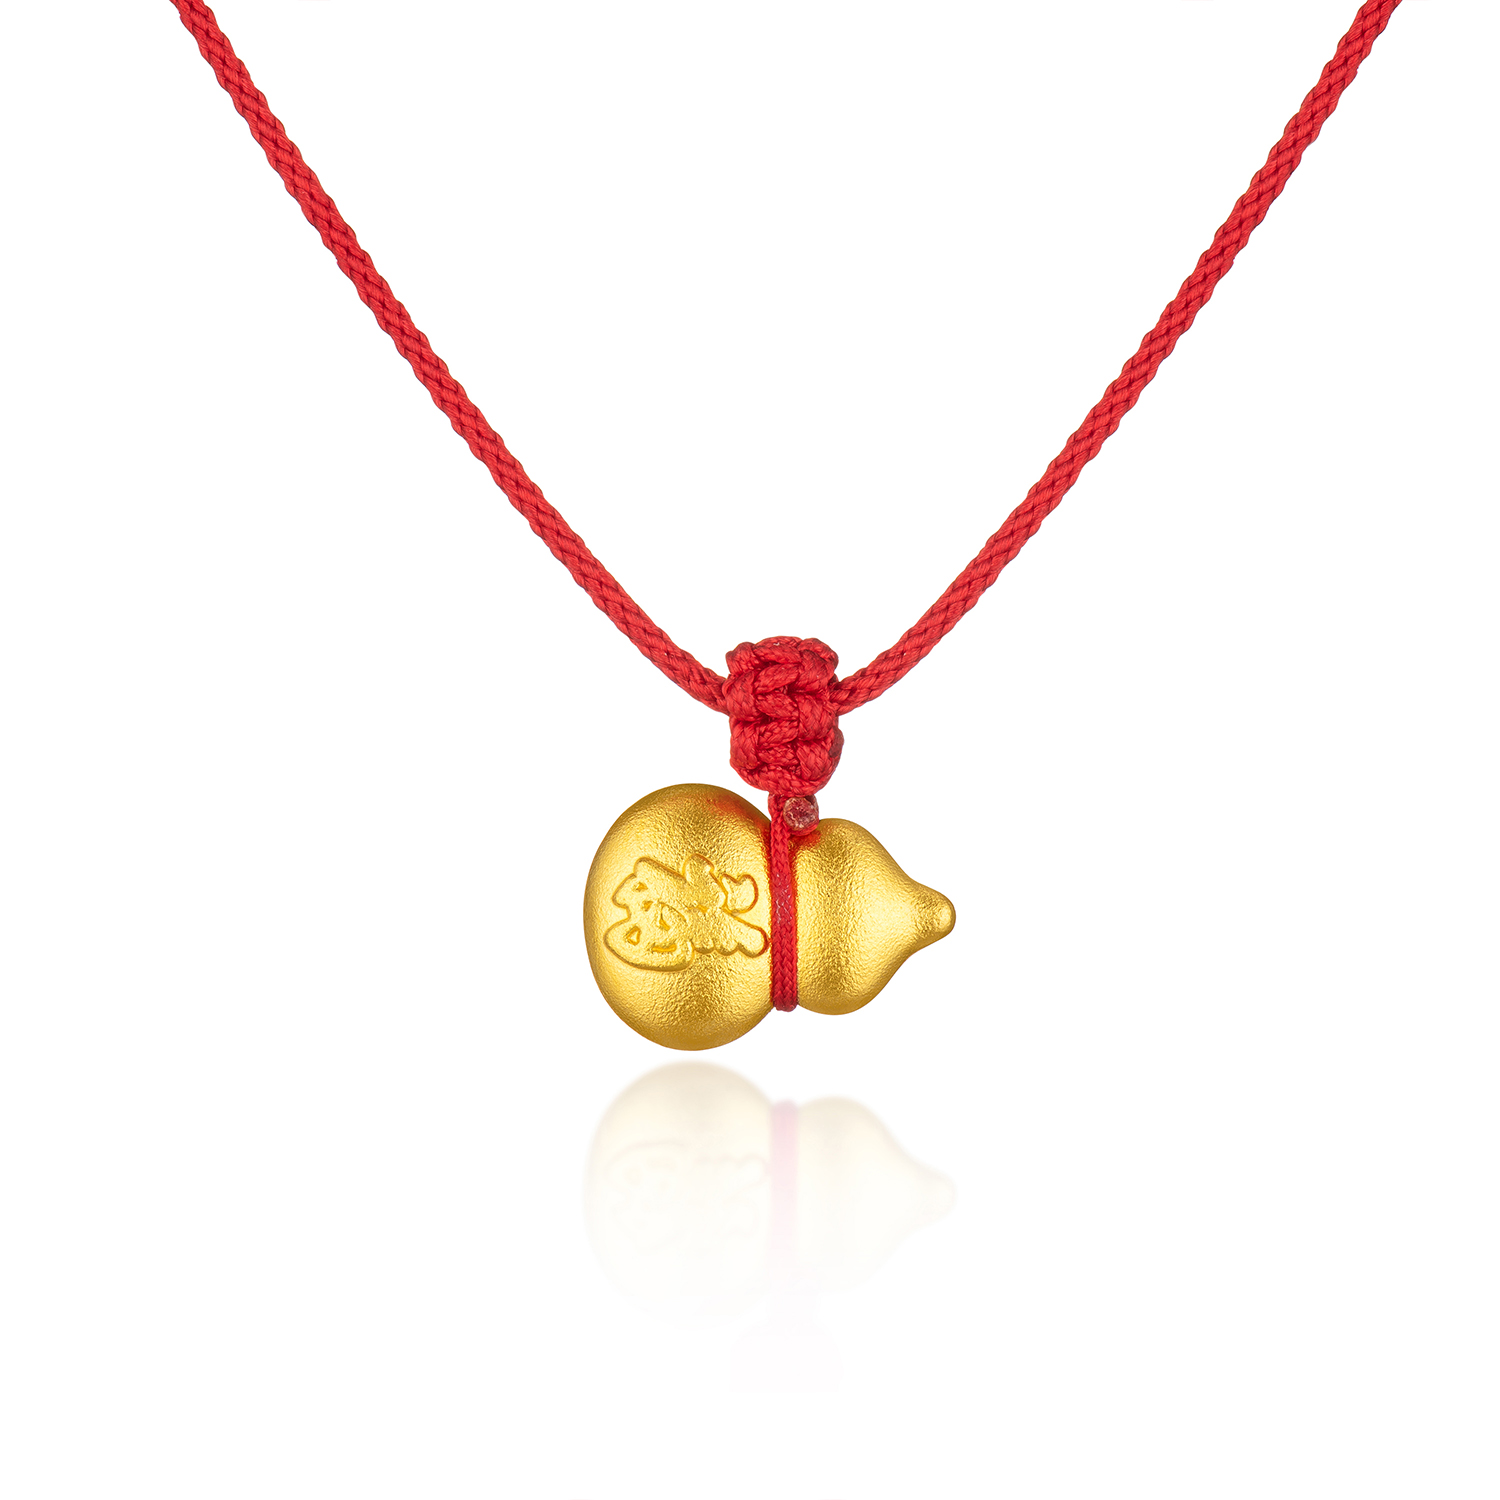 Heirloom Fortune Collection “Endless Fortune” Gold Baby Pendant